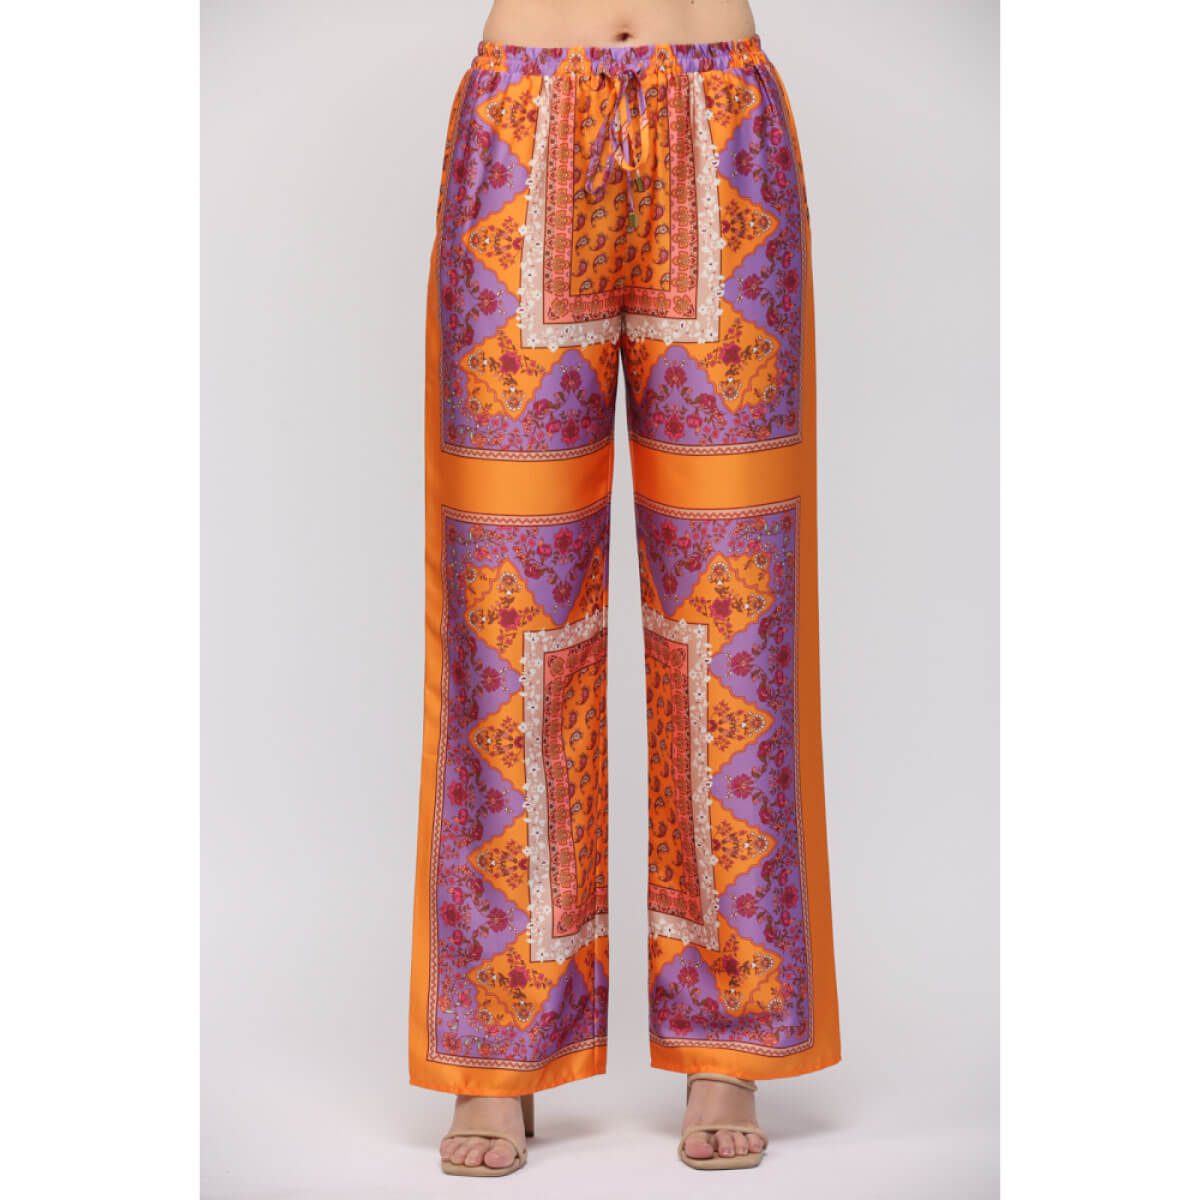 Is That The New Hippie Geo Print Flare Leg Pants ??